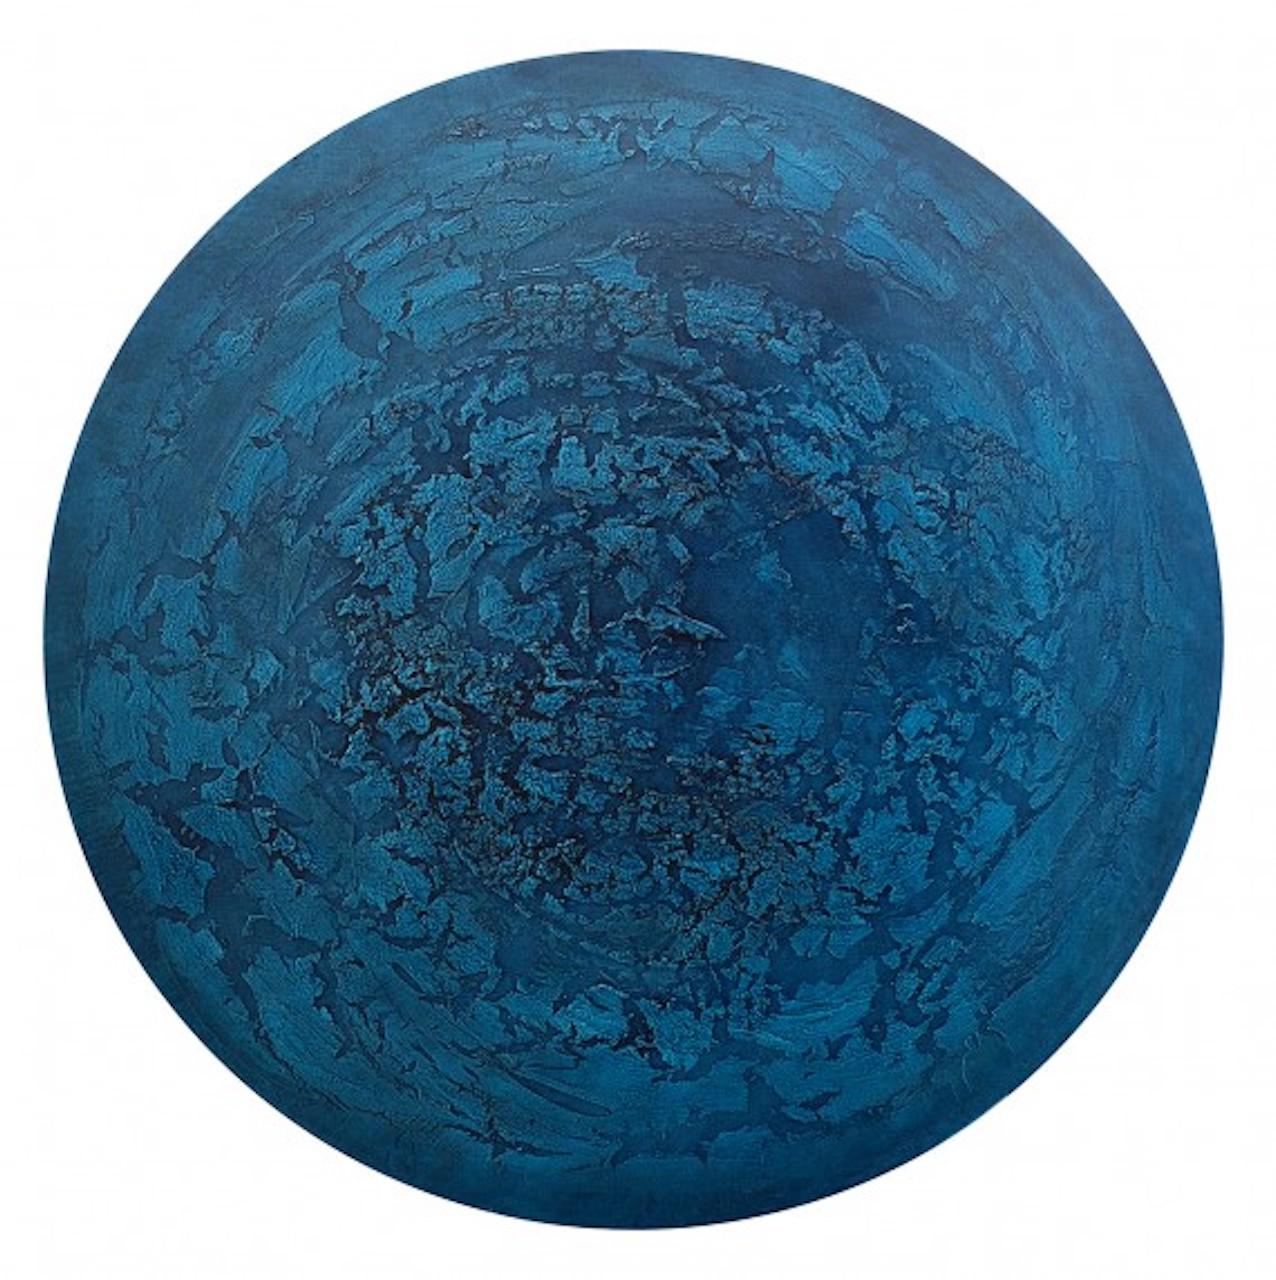 Jonathan Moss Still-Life Painting - CN 6, Abstract Astronomy Painting, Contemporary Artwork, Blue Textured Artwork